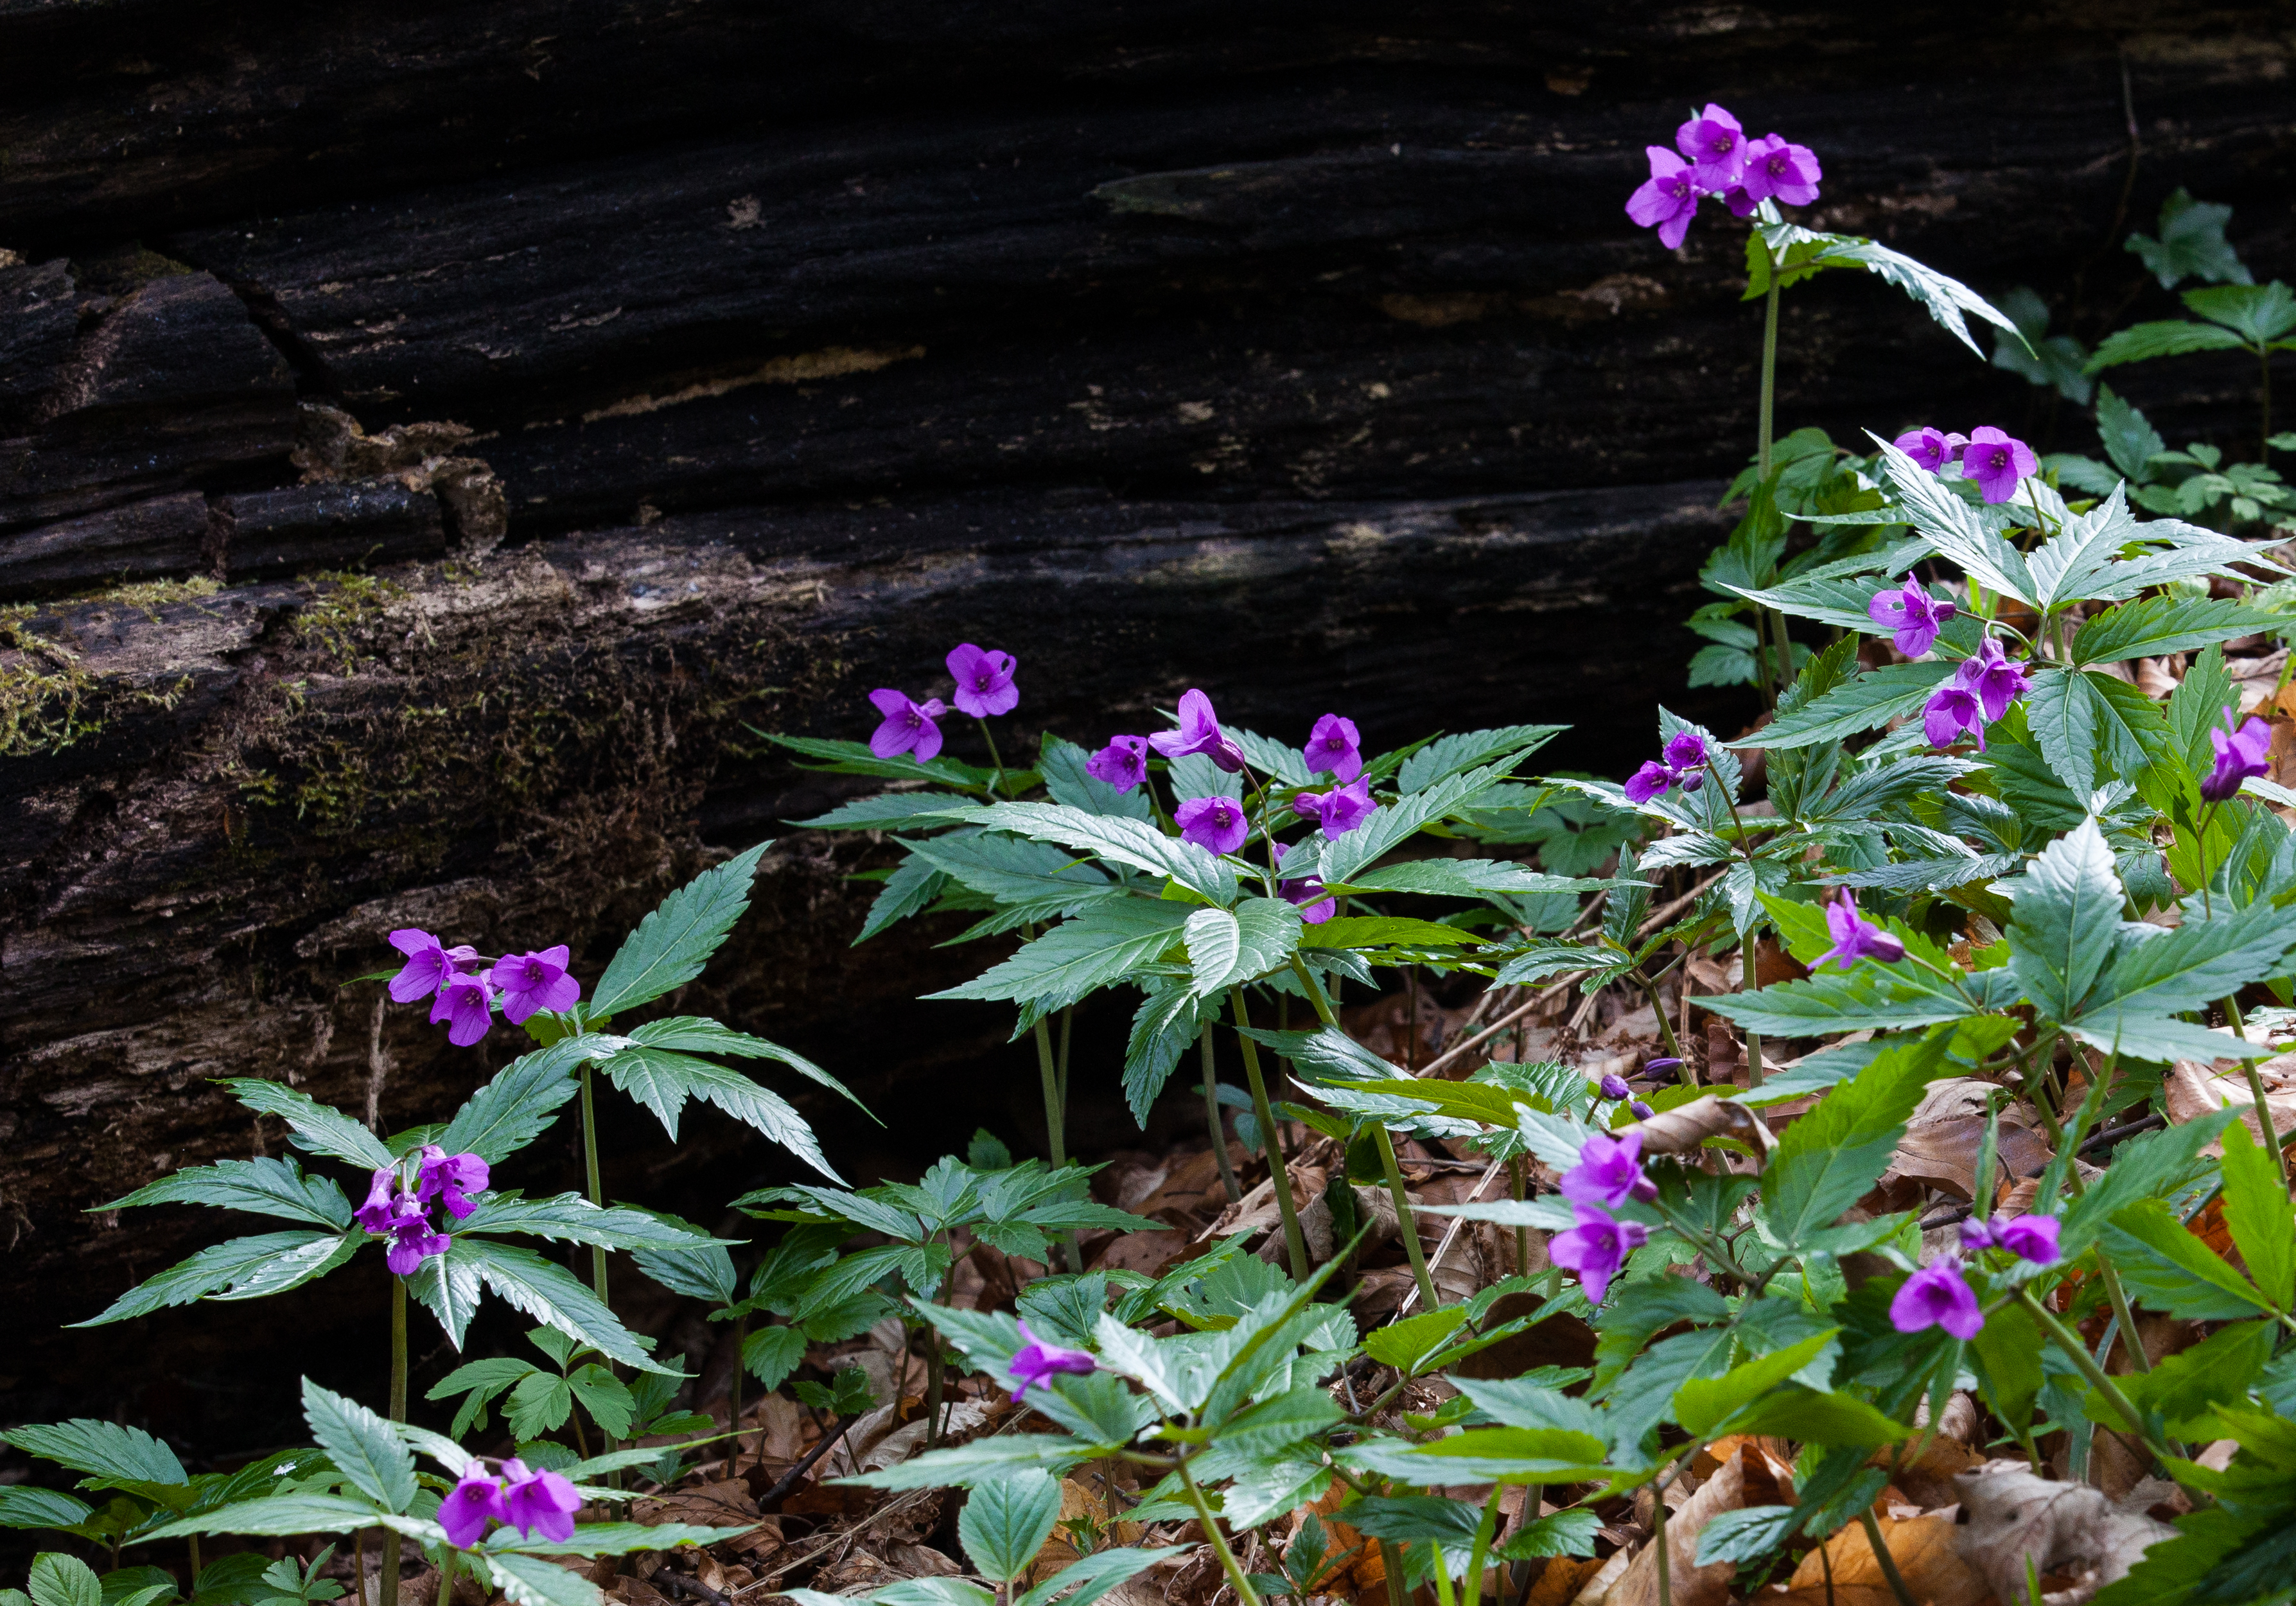 purple flowers in a forest in Lviv region of Ukraine in March 2014, picture 4/4